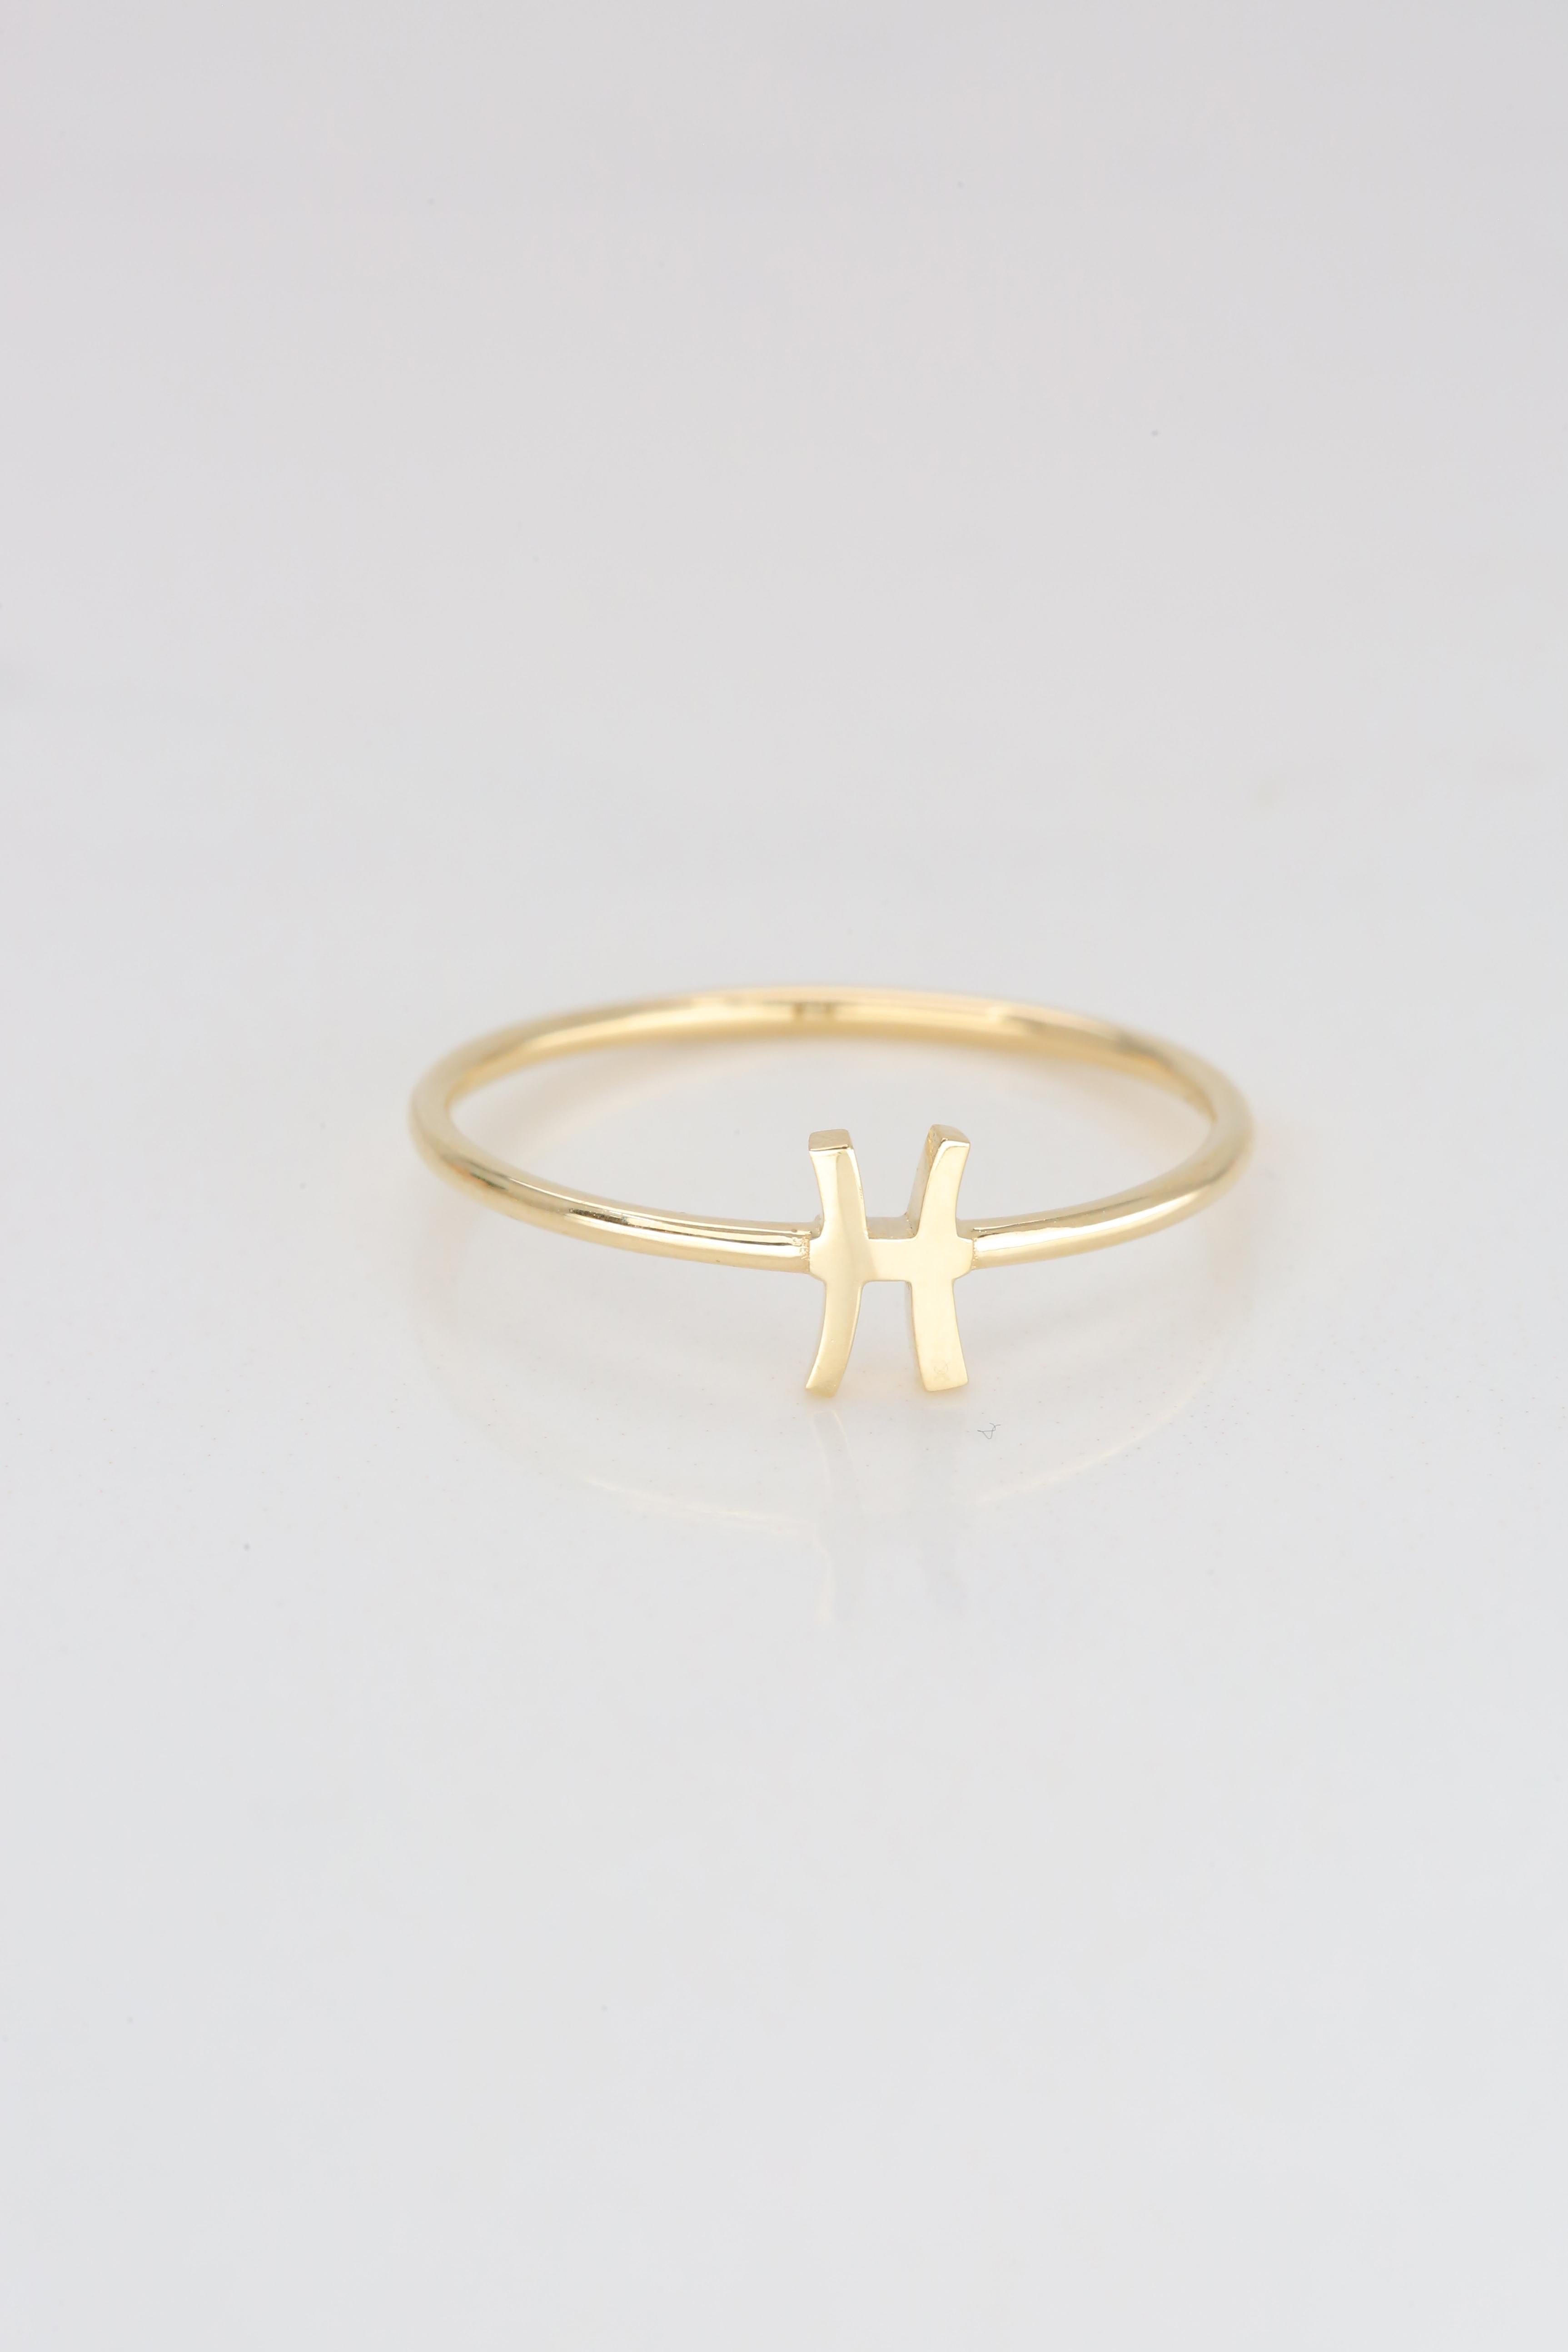 For Sale:  14K Gold Pisces Ring, Pisces Sign Gold Ring 5